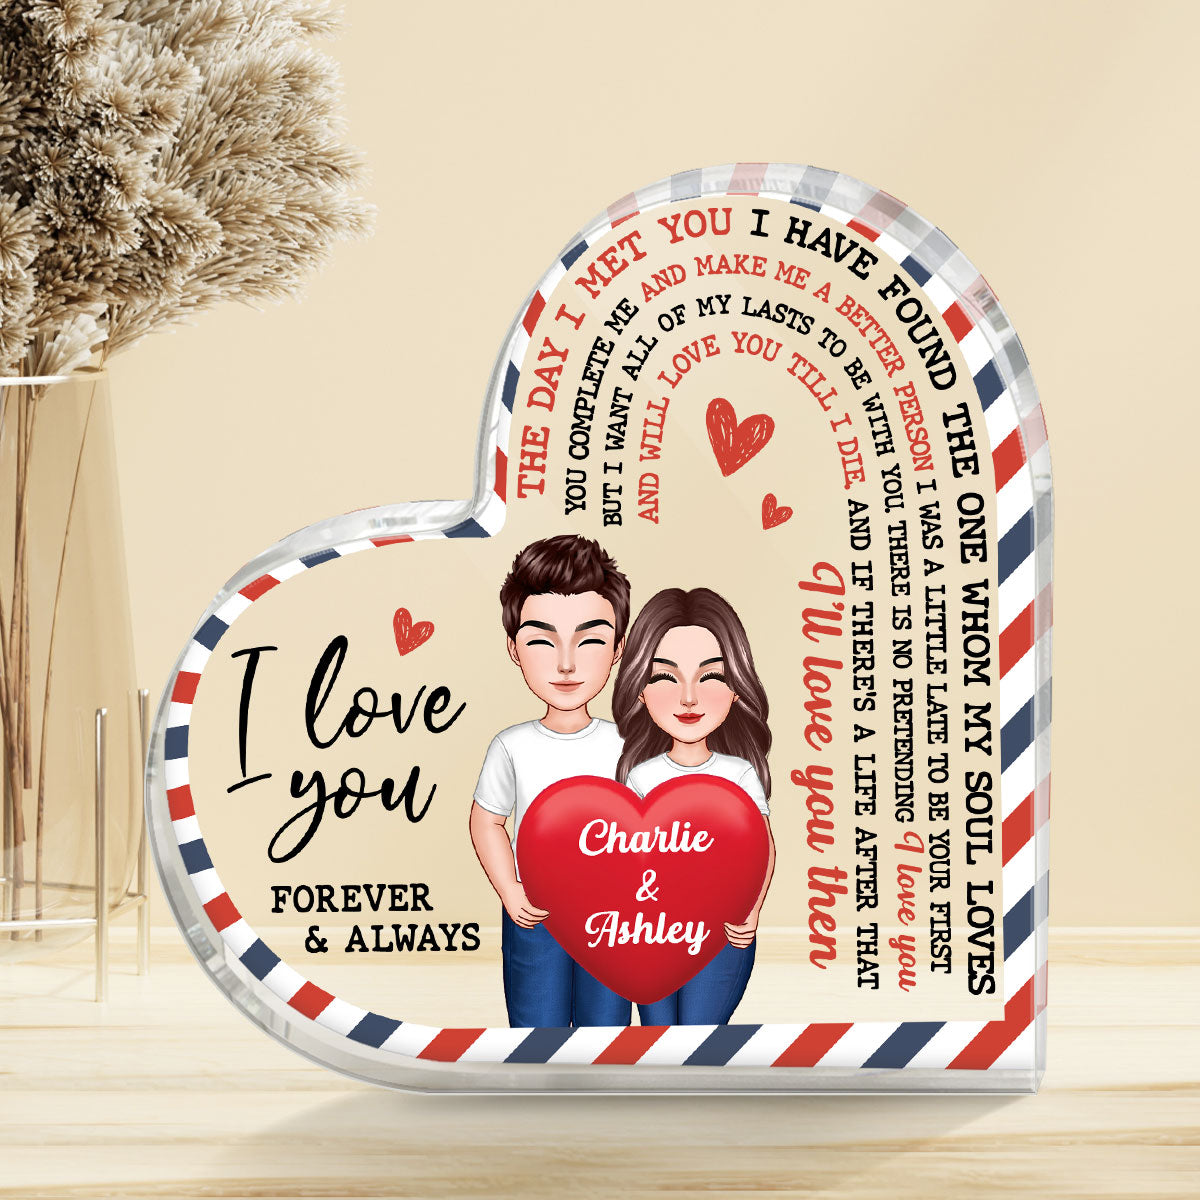 The Day I Met You Couple Holding Heart Envelope Frame Personalized Heart Shape Acrylic Plaque